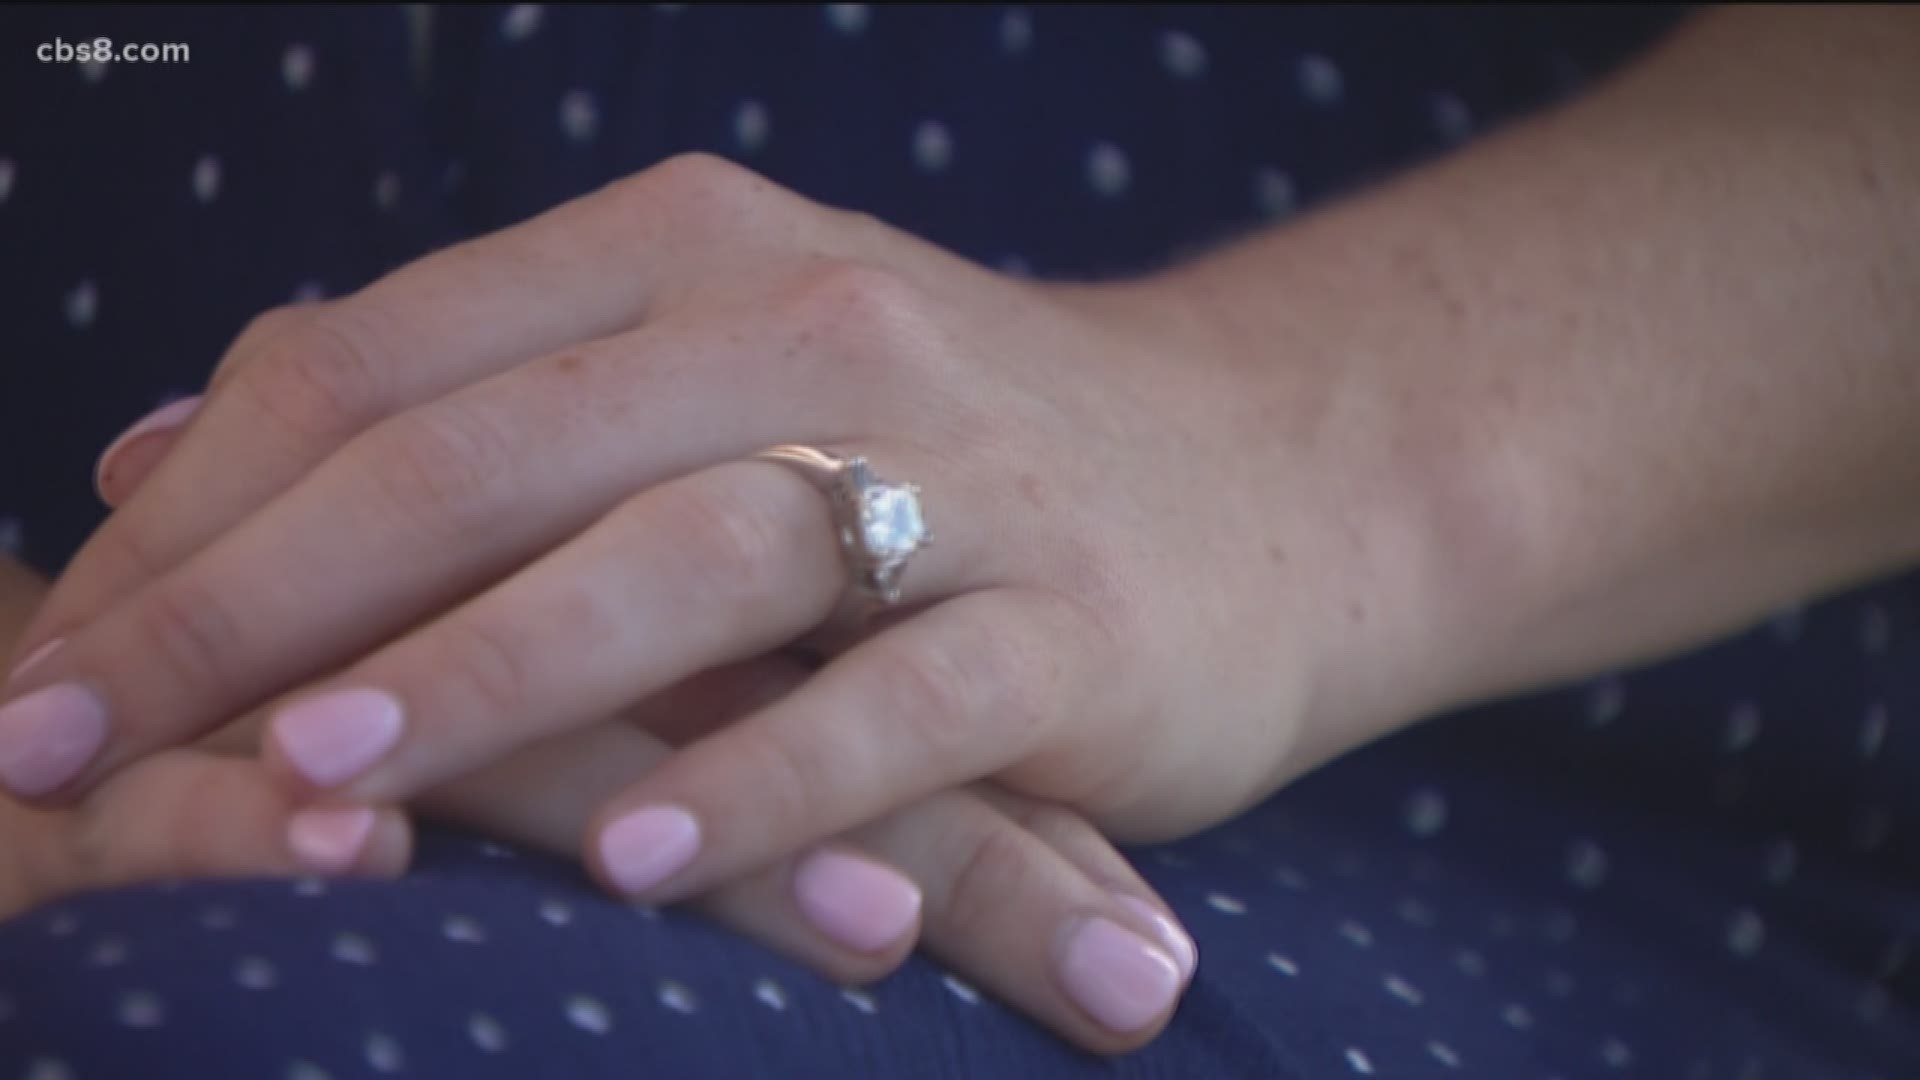 Jenna Evans said her dream included her fiance, Bobby Howell, which she said led to her swallowing the 2.4 carat diamond ring.